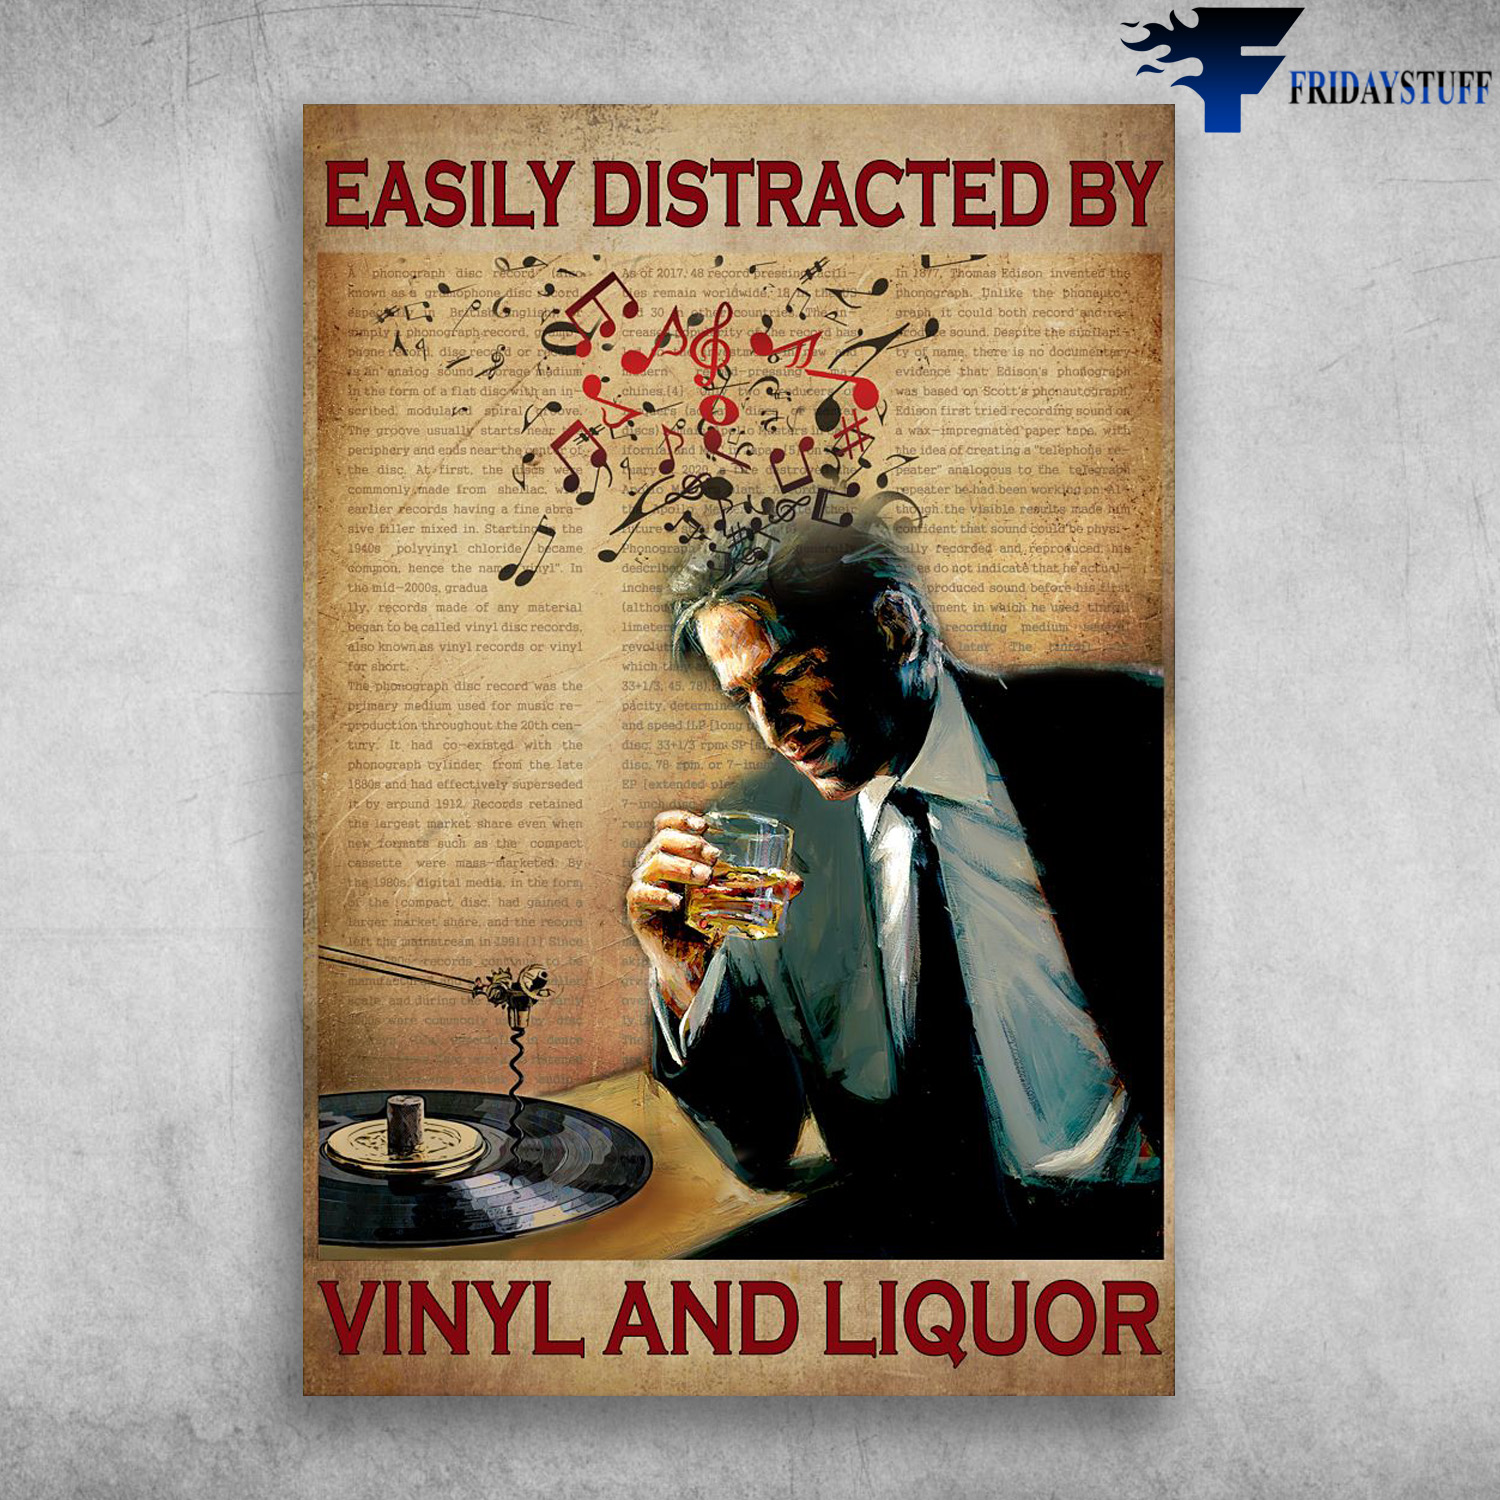 Man Loves Wine And Music - Easily Distracted, By Vinyl And Liquor